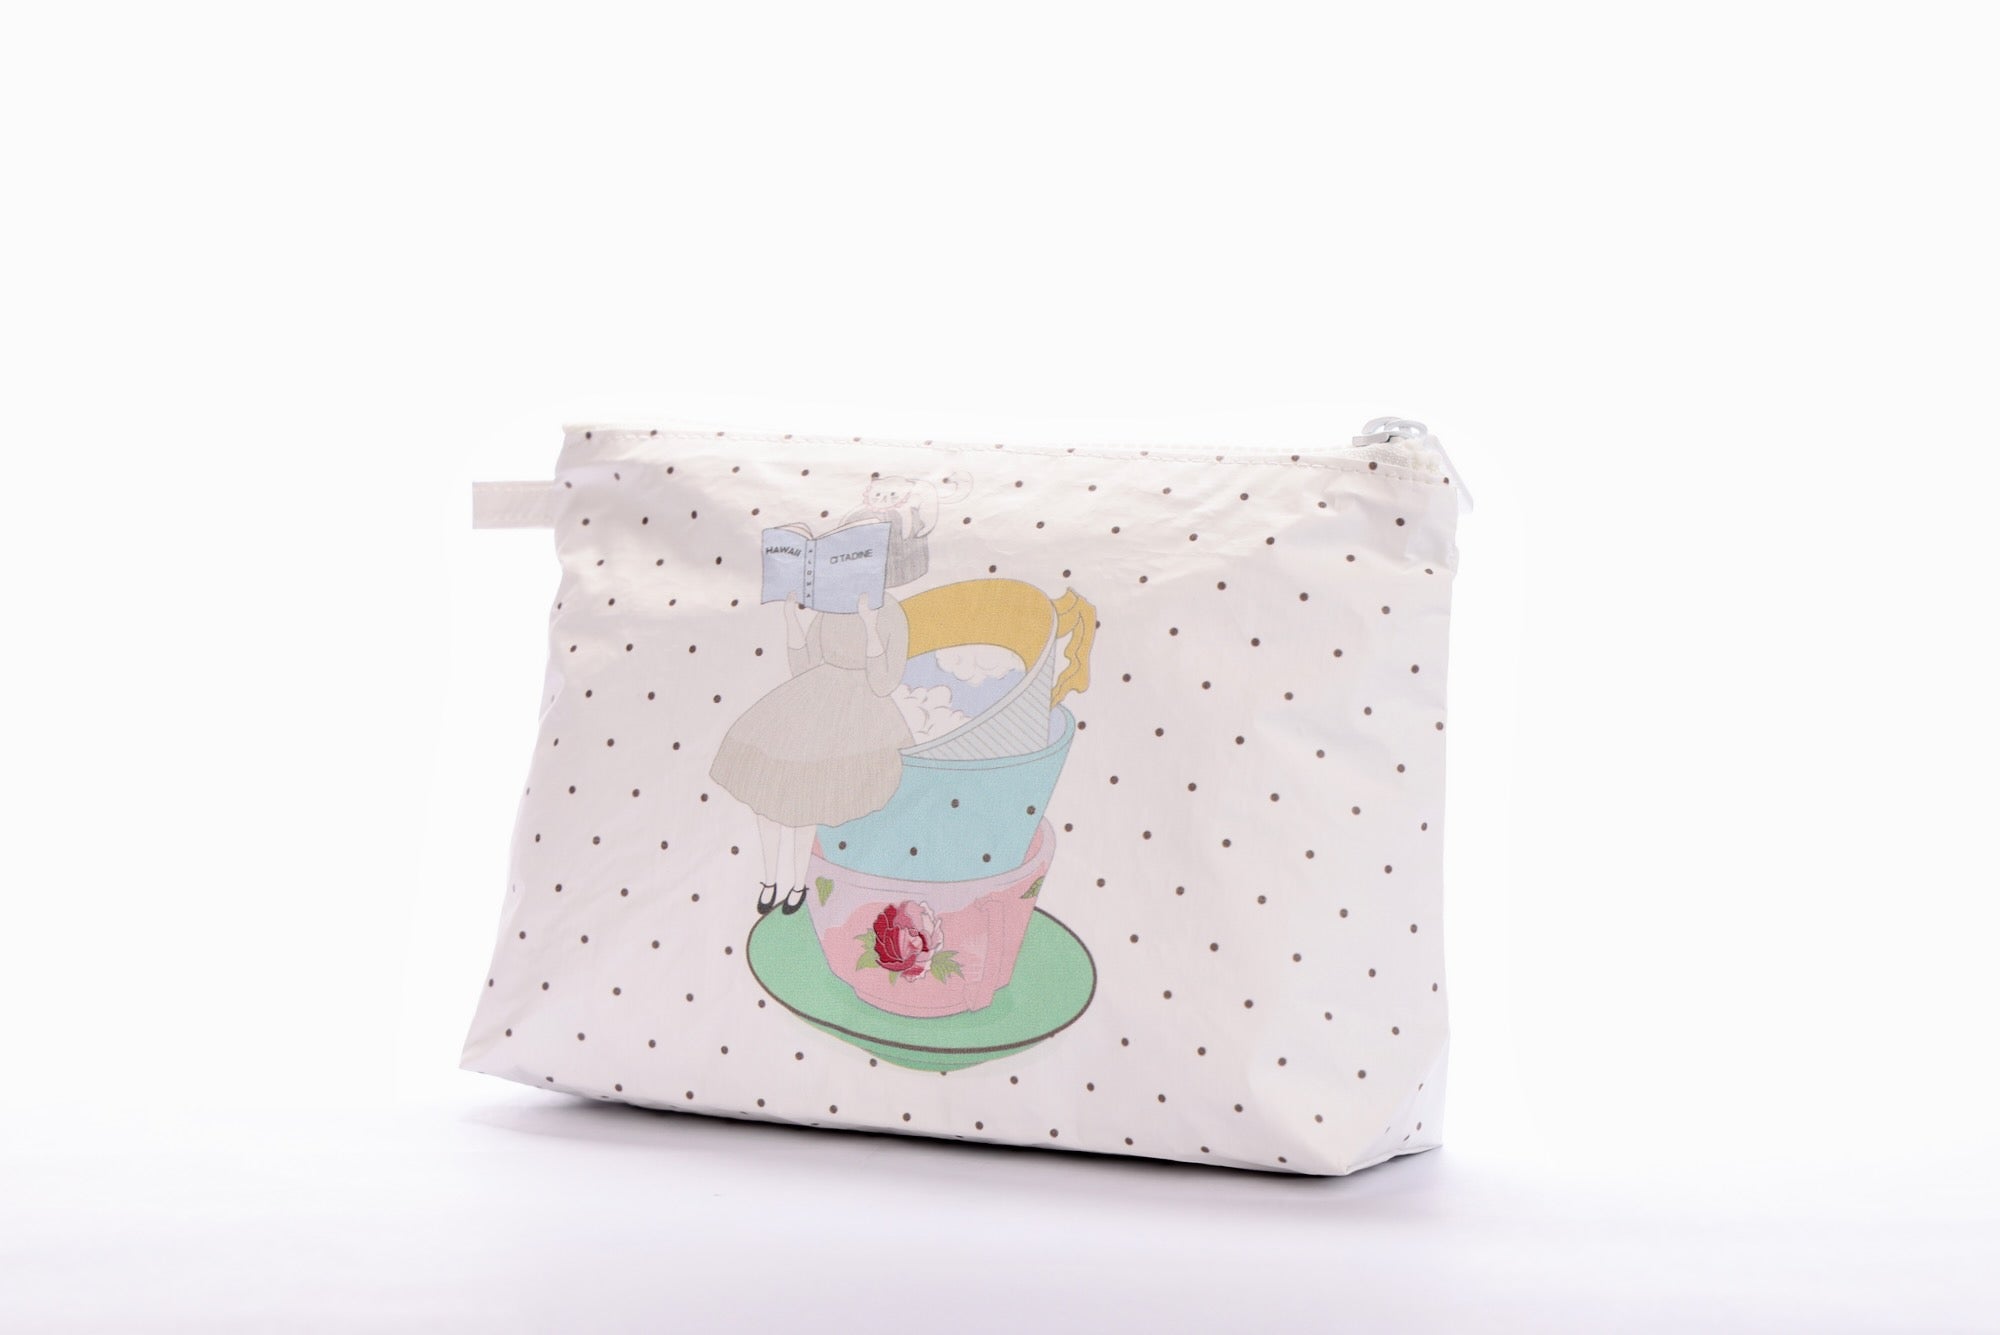 Multifunctional Small Pouch for Travel | Tea Time Pouch | Citadine